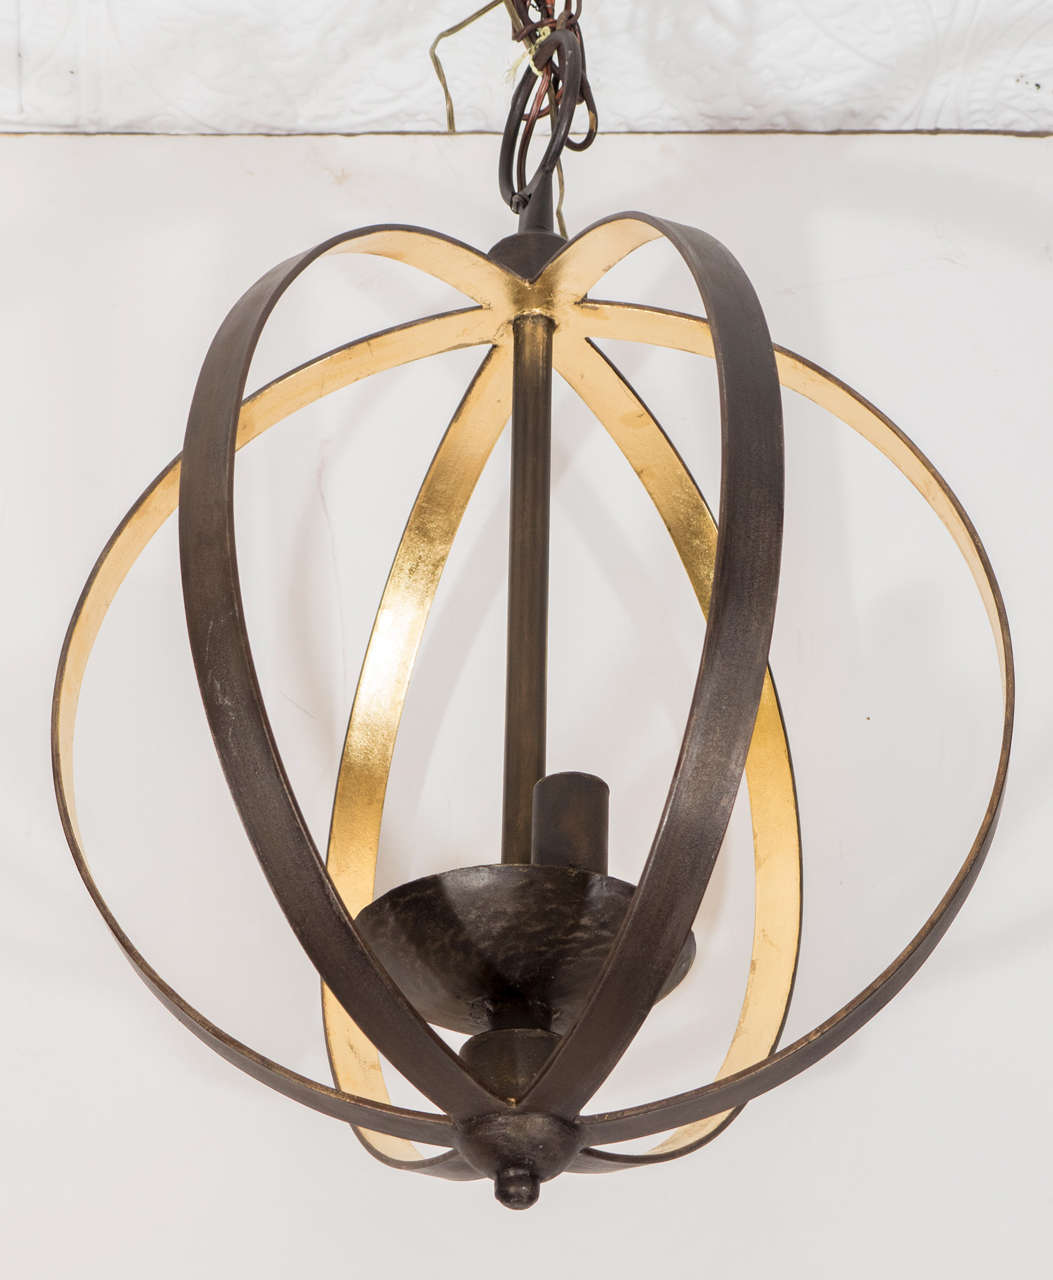 Round pendant light made of iron. Newly wired. Holds two bulbs. Gold Leaf on Interior.
Quantity available -priced per unit